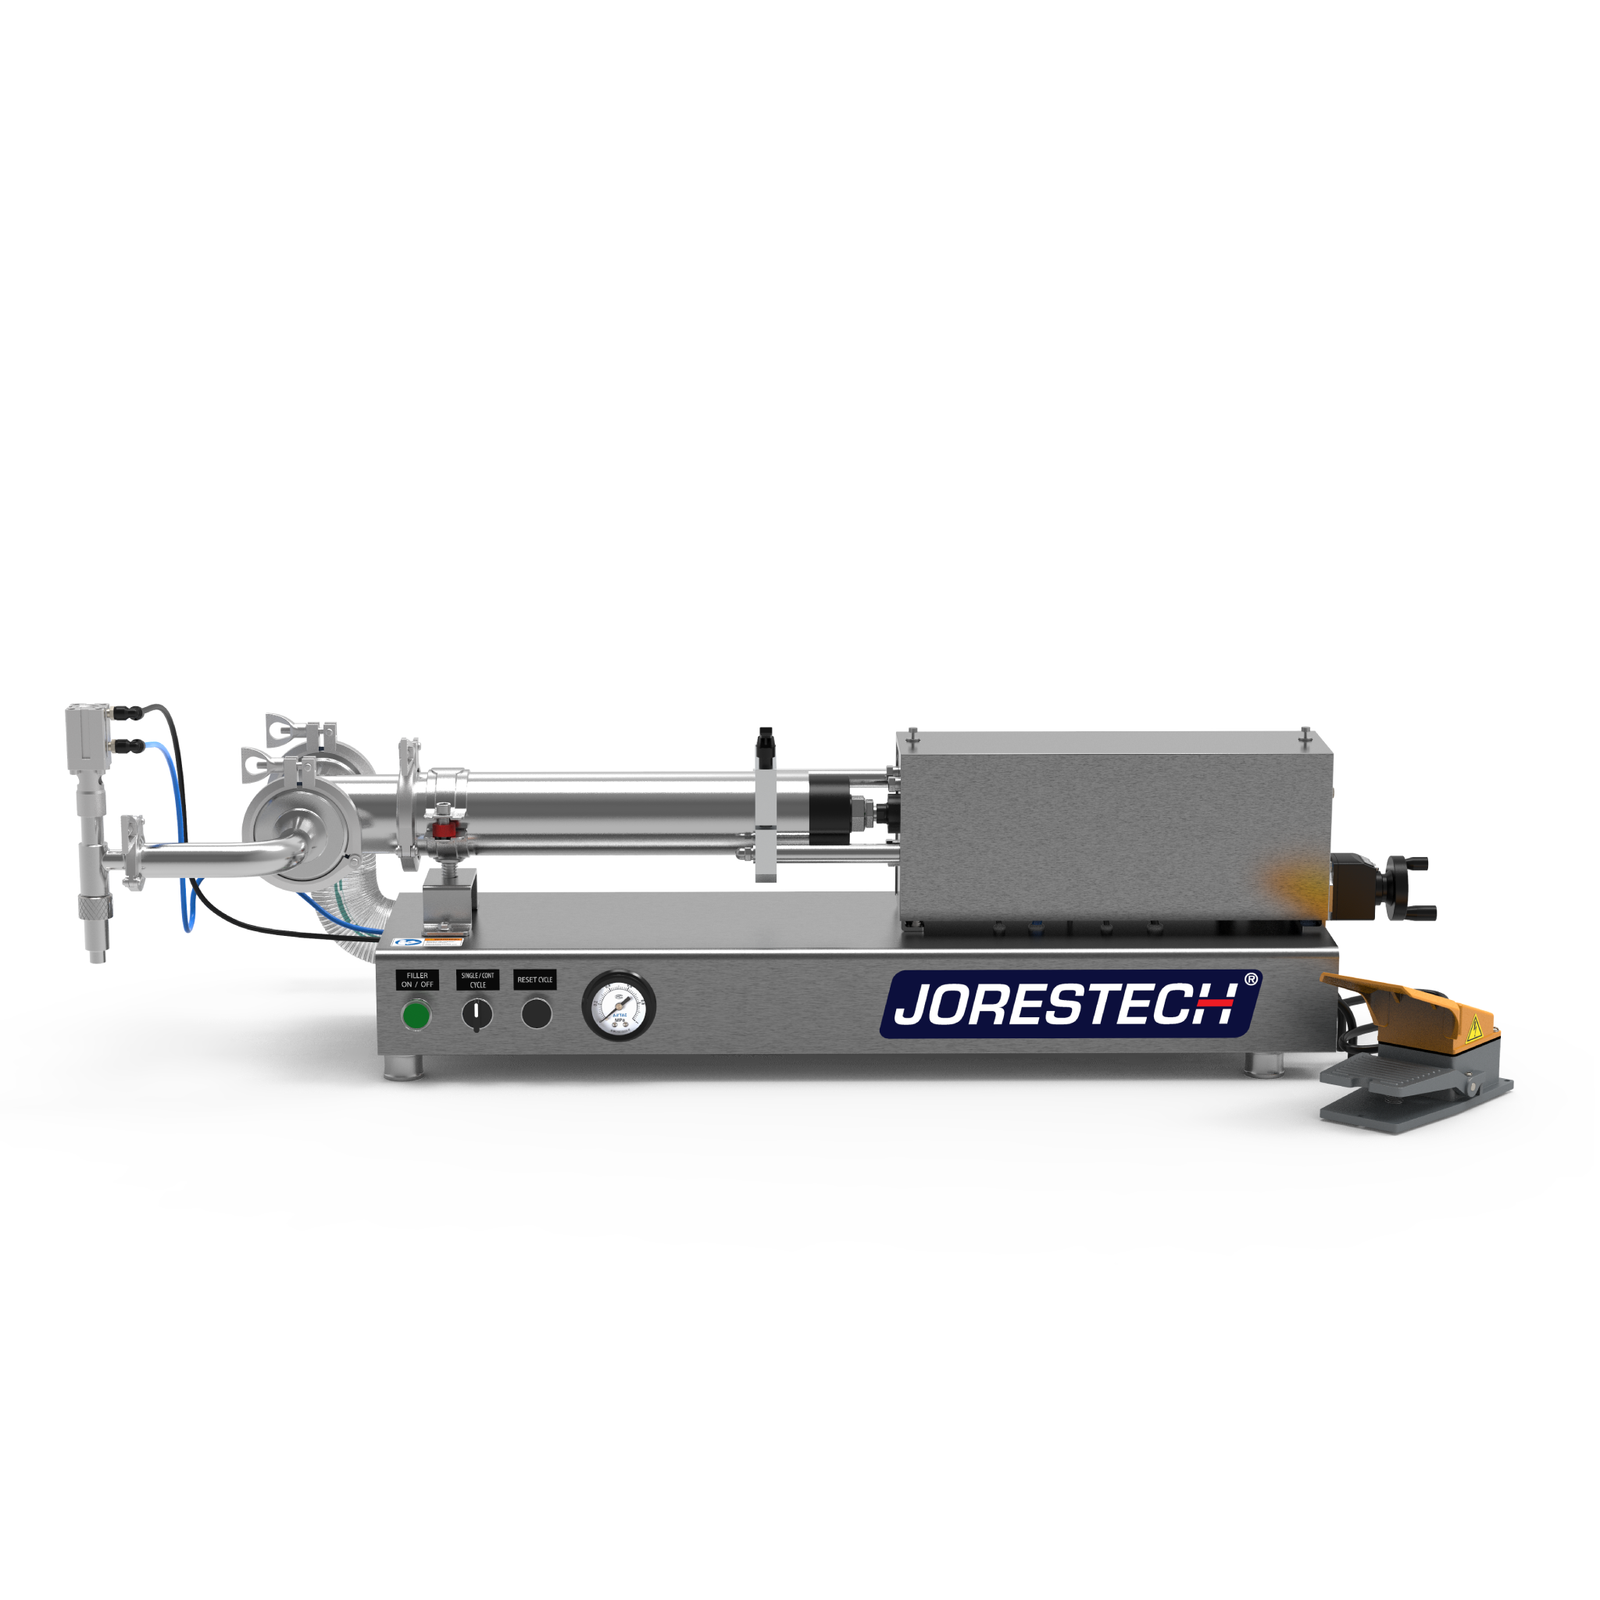 Low viscosity JORES TECHNOLOGIES® piston filling machine in a frontal view. The piston filler is made out of stainless steel and there's a yellow and grey foot pedal resting on the side.